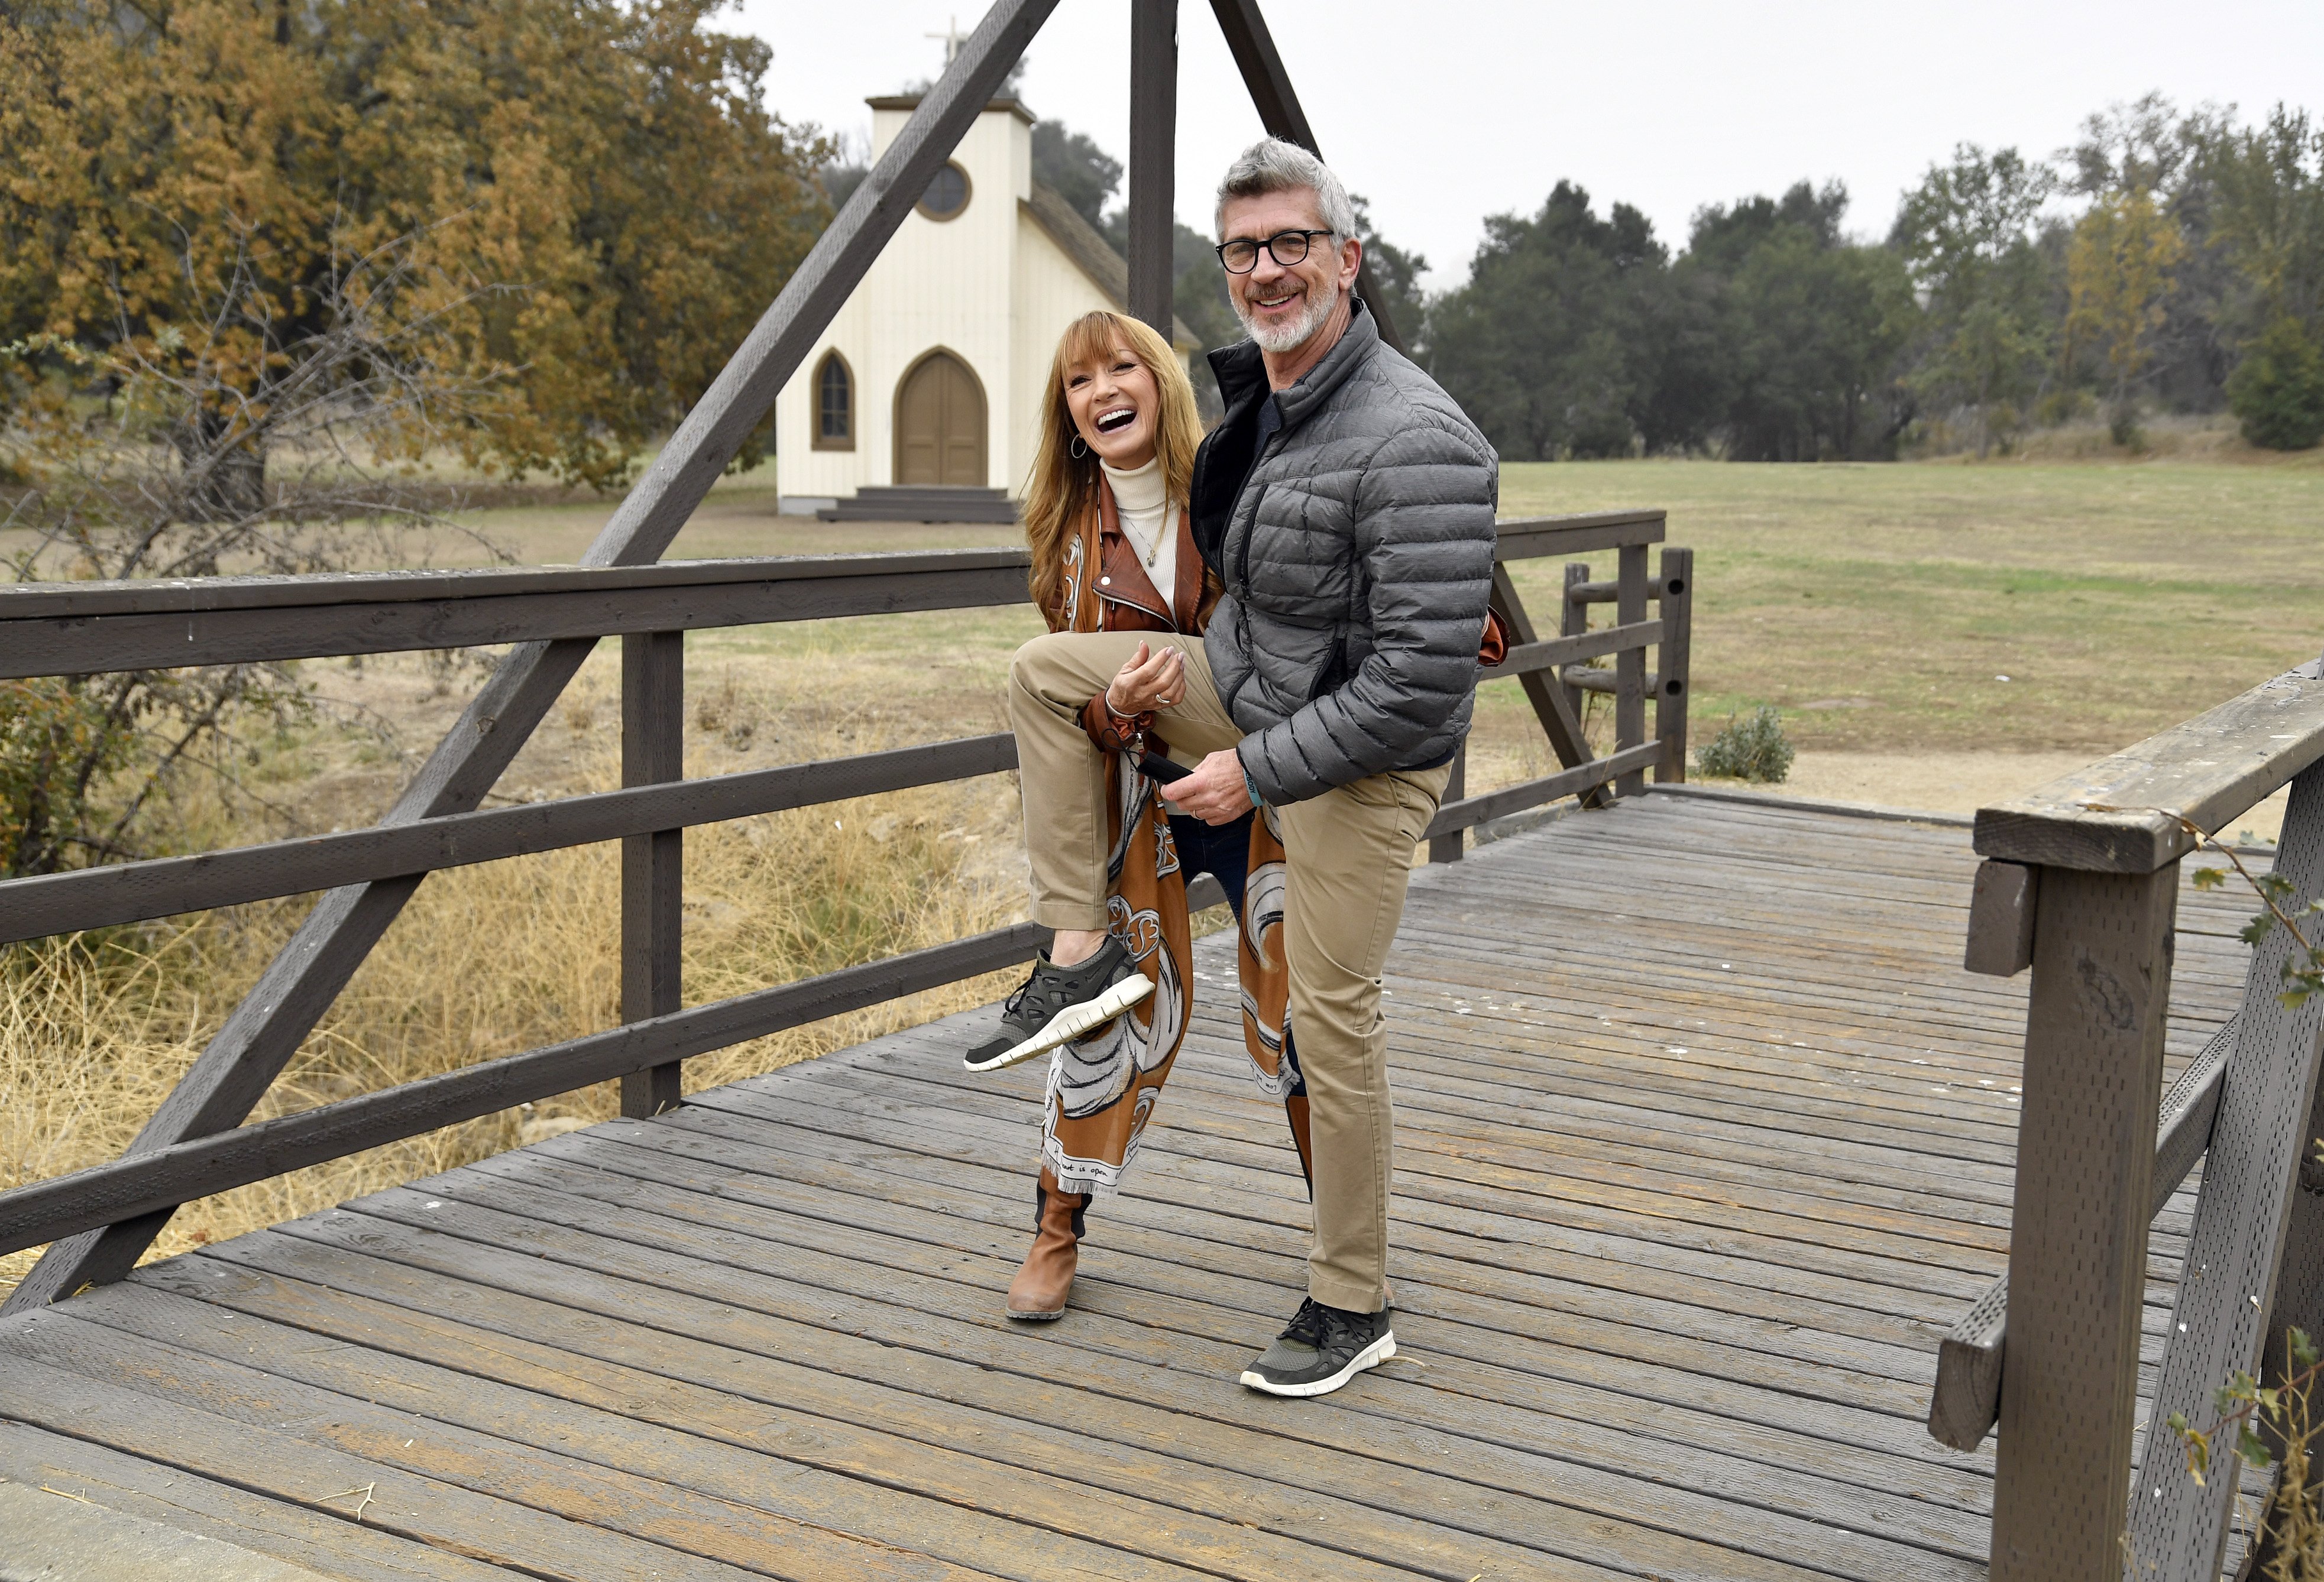 Joe Lando and Jane Seymour tour the remnants of the "Dr. Quinn: Medicine Woman" sets at Paramount Ranch on December 04, 2021 in Agoura Hills, California | Photo: Getty Images